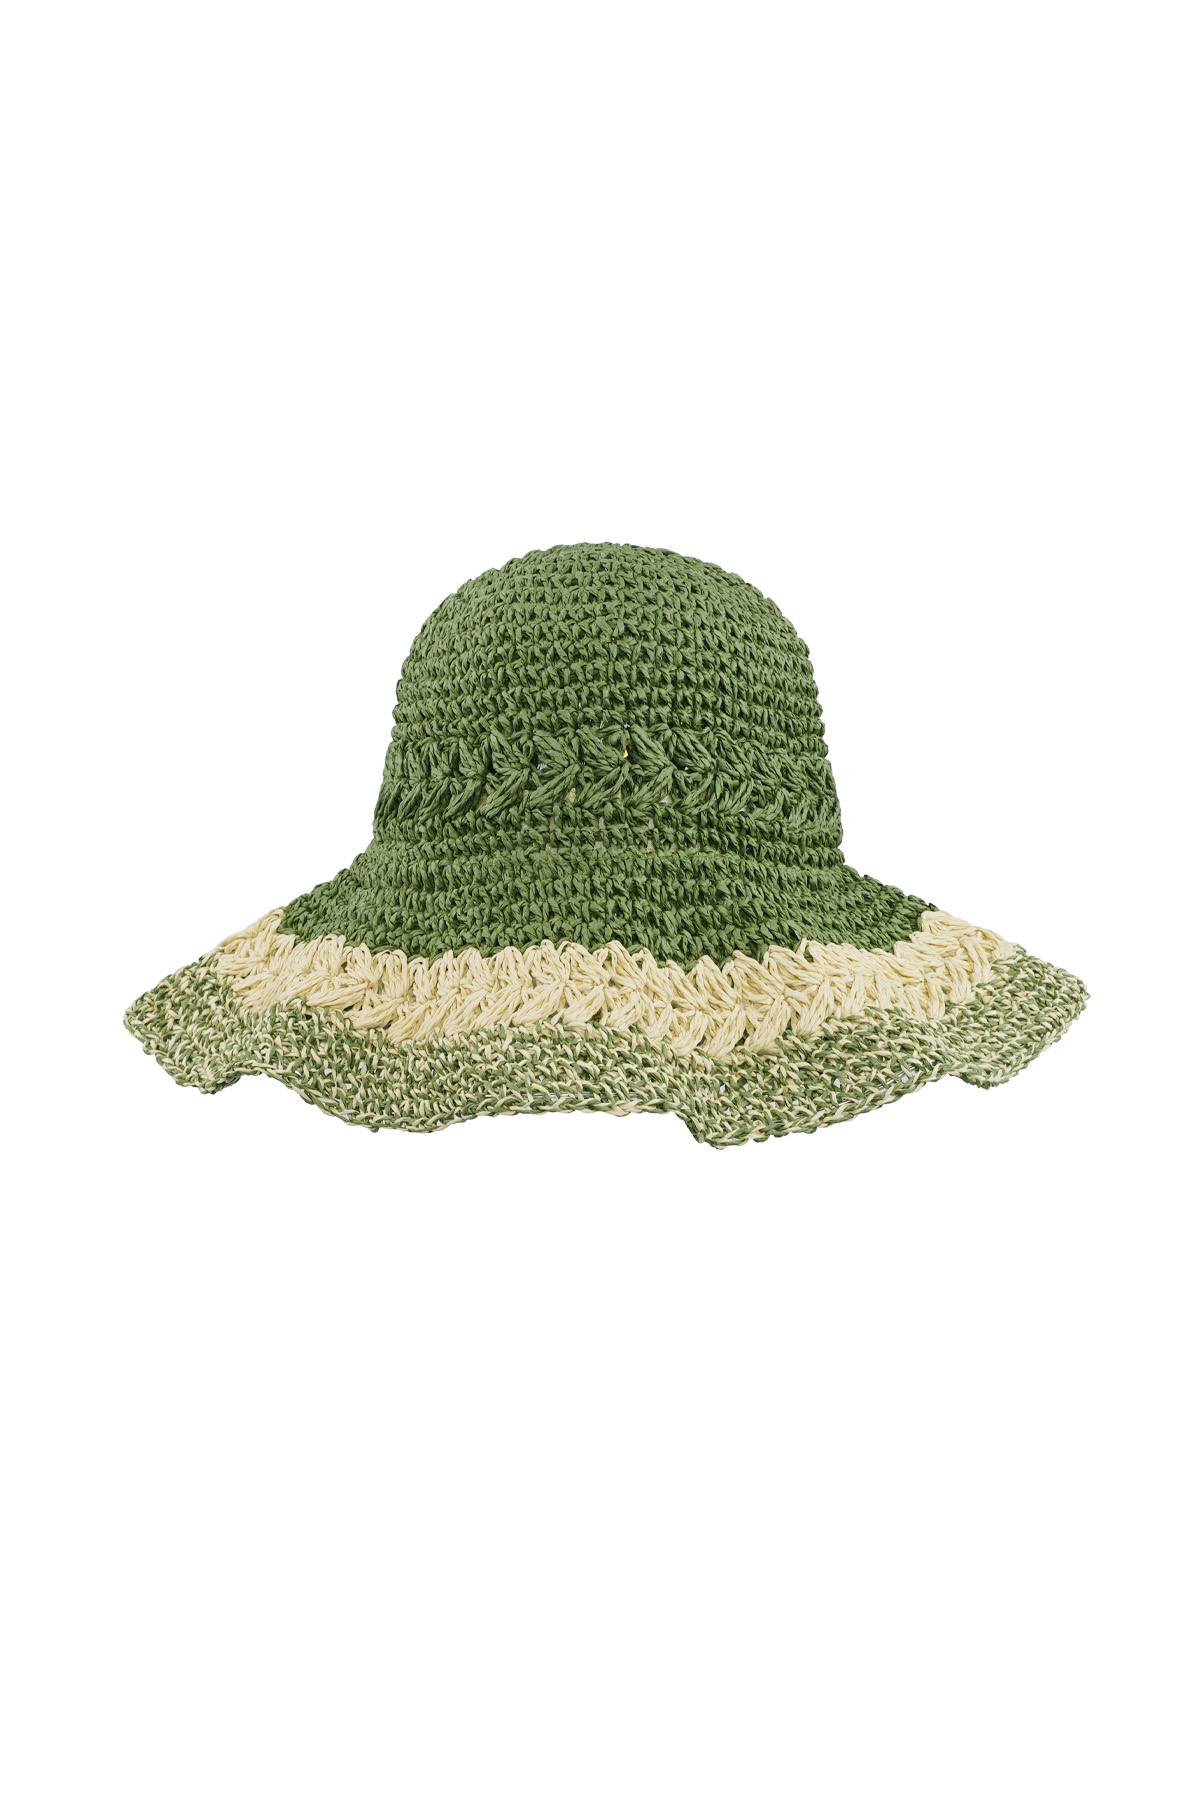 Braided hat with layers - green 